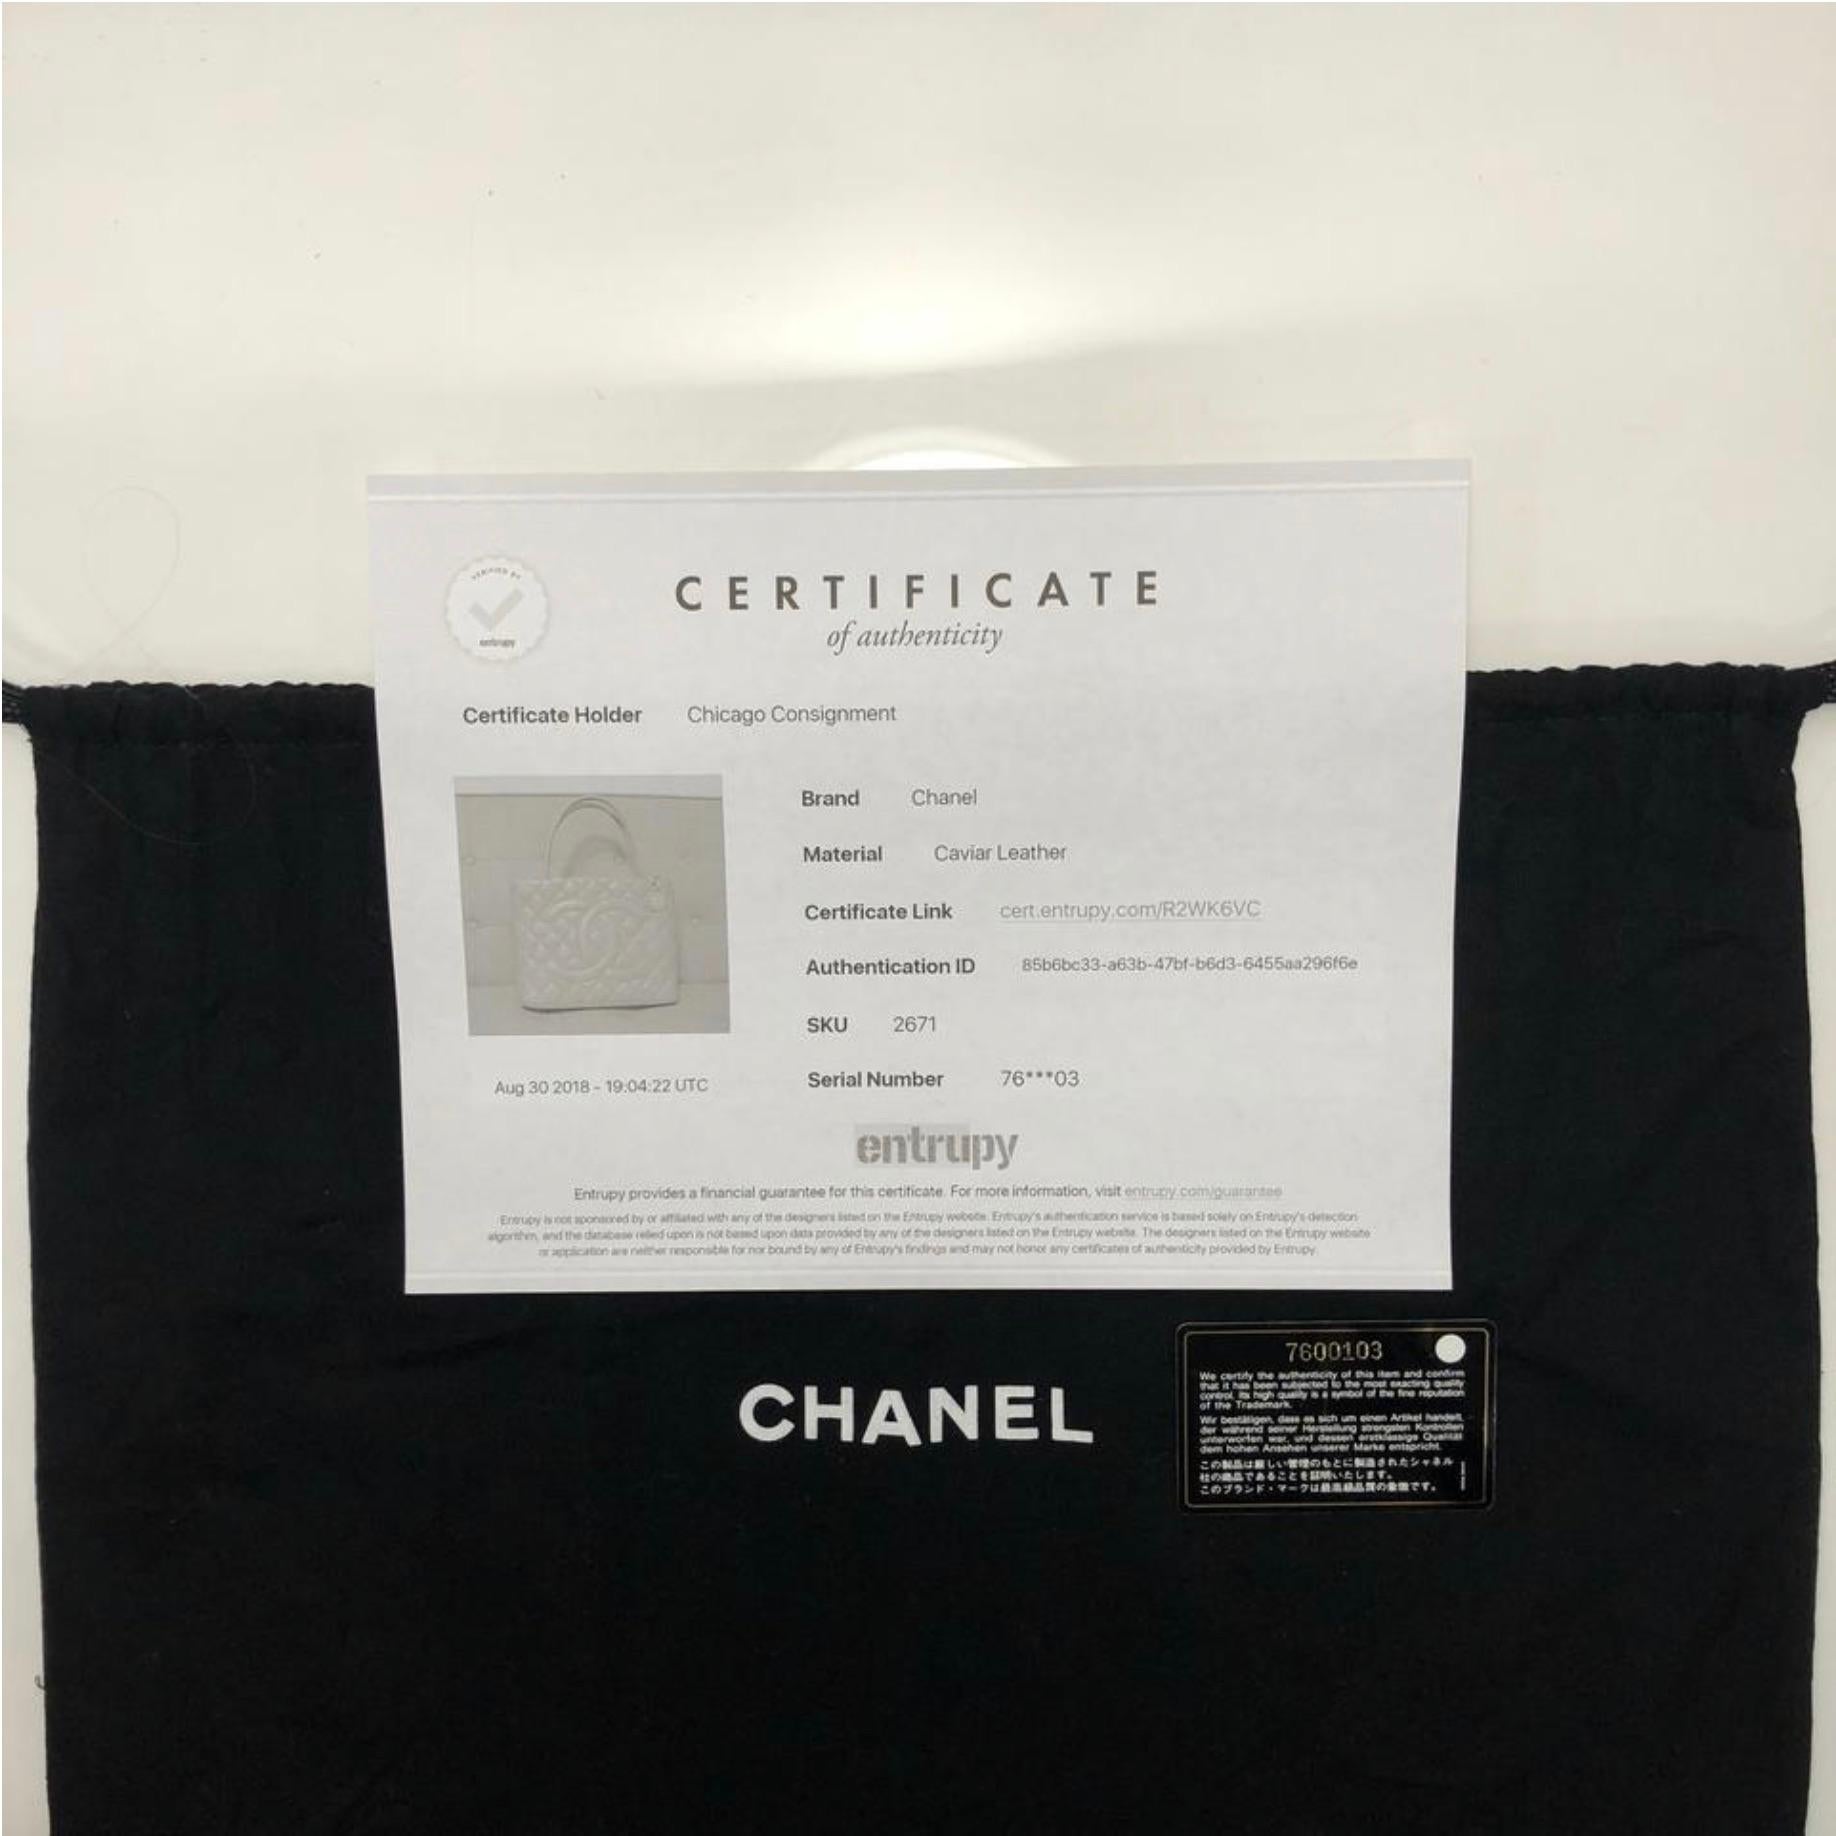 MODEL - Chanel Caviar Leather Medallion with Gold Hardware in Beige

CONDITION - Exceptional! No visibile signs of wear.

SKU - 2671

ORIGINAL/CURRENT RETAIL PRICE - 2900 + tax

DATE/SERIAL CODE - 7600103

ORIGIN - Italy

PRODUCTION -